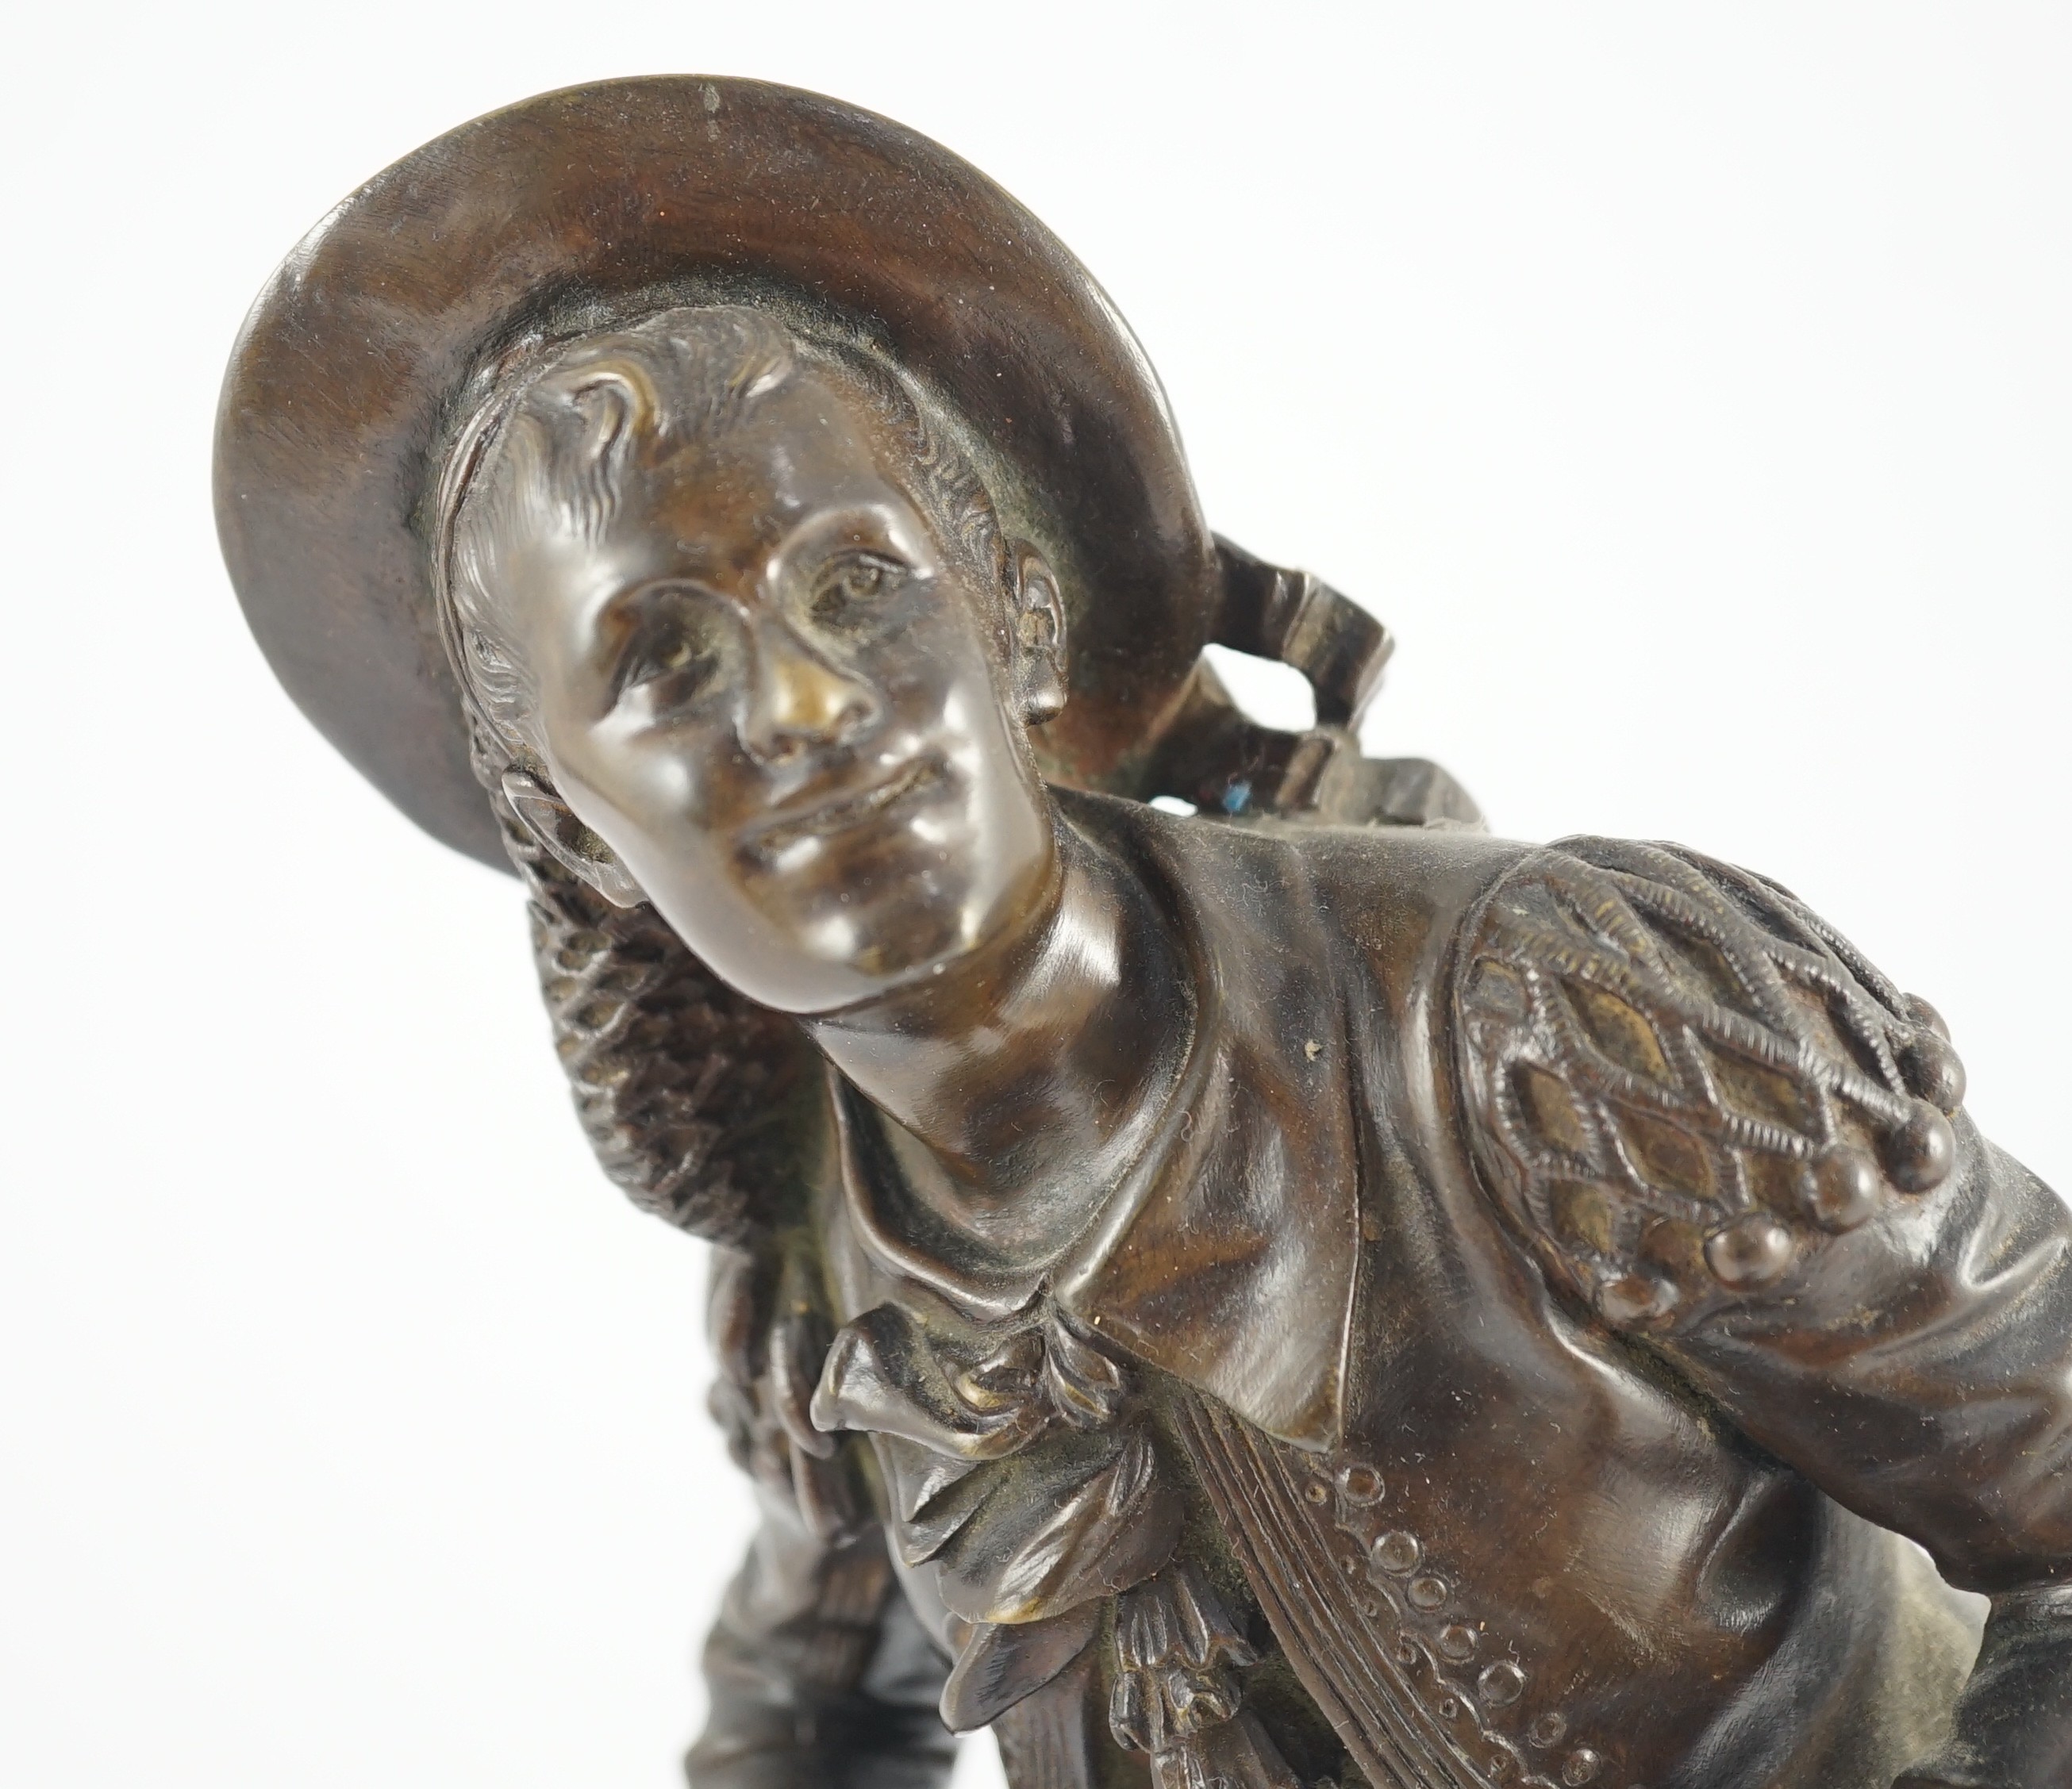 Eutrope Bouret (French, 1833-1906). A bronze figure of 'Figaro', standing playing a mandolin, signed - Image 2 of 9